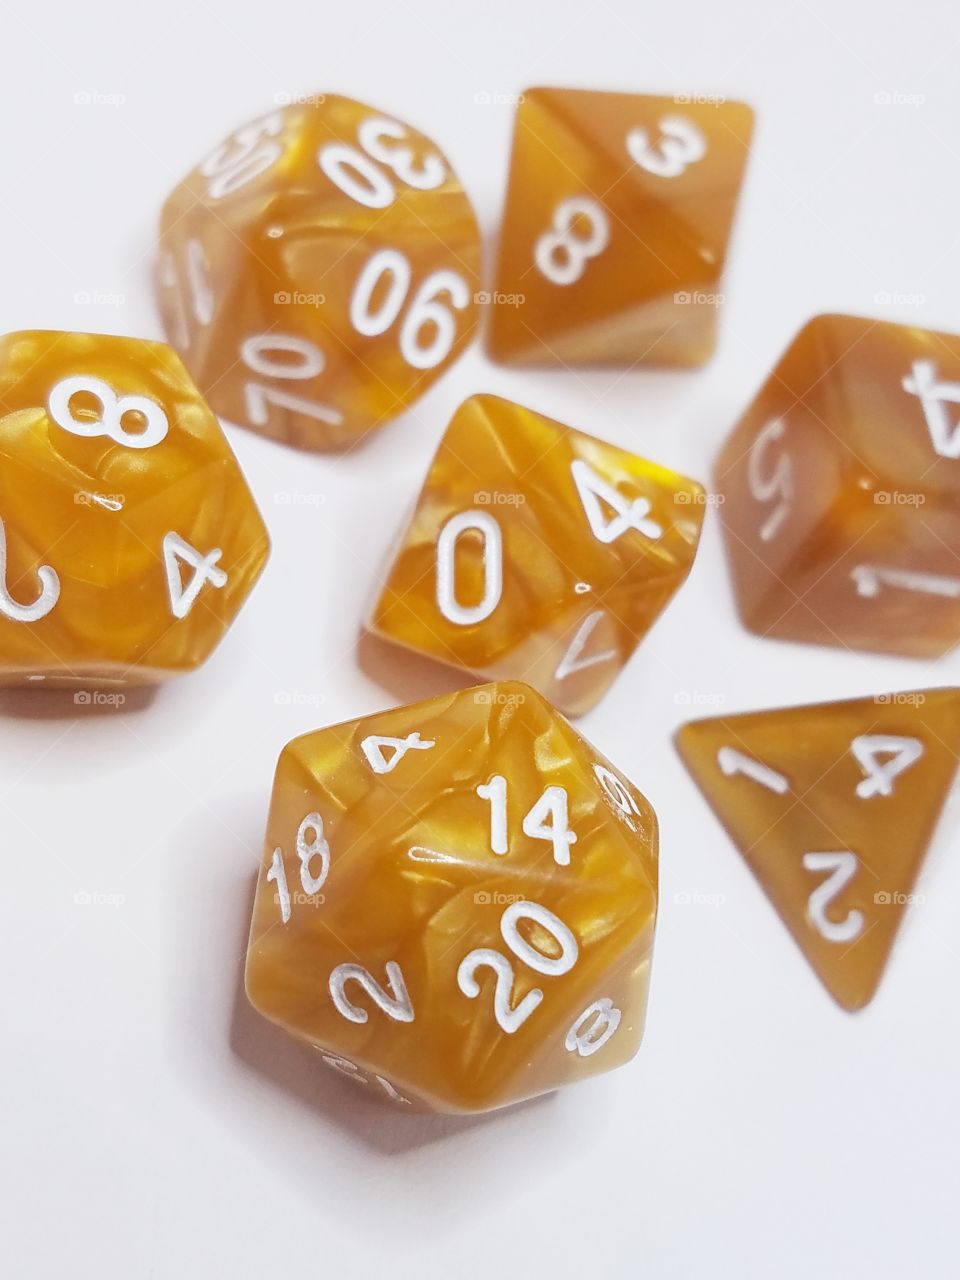 Colorful set of polyhedral dice for table-top gaming.